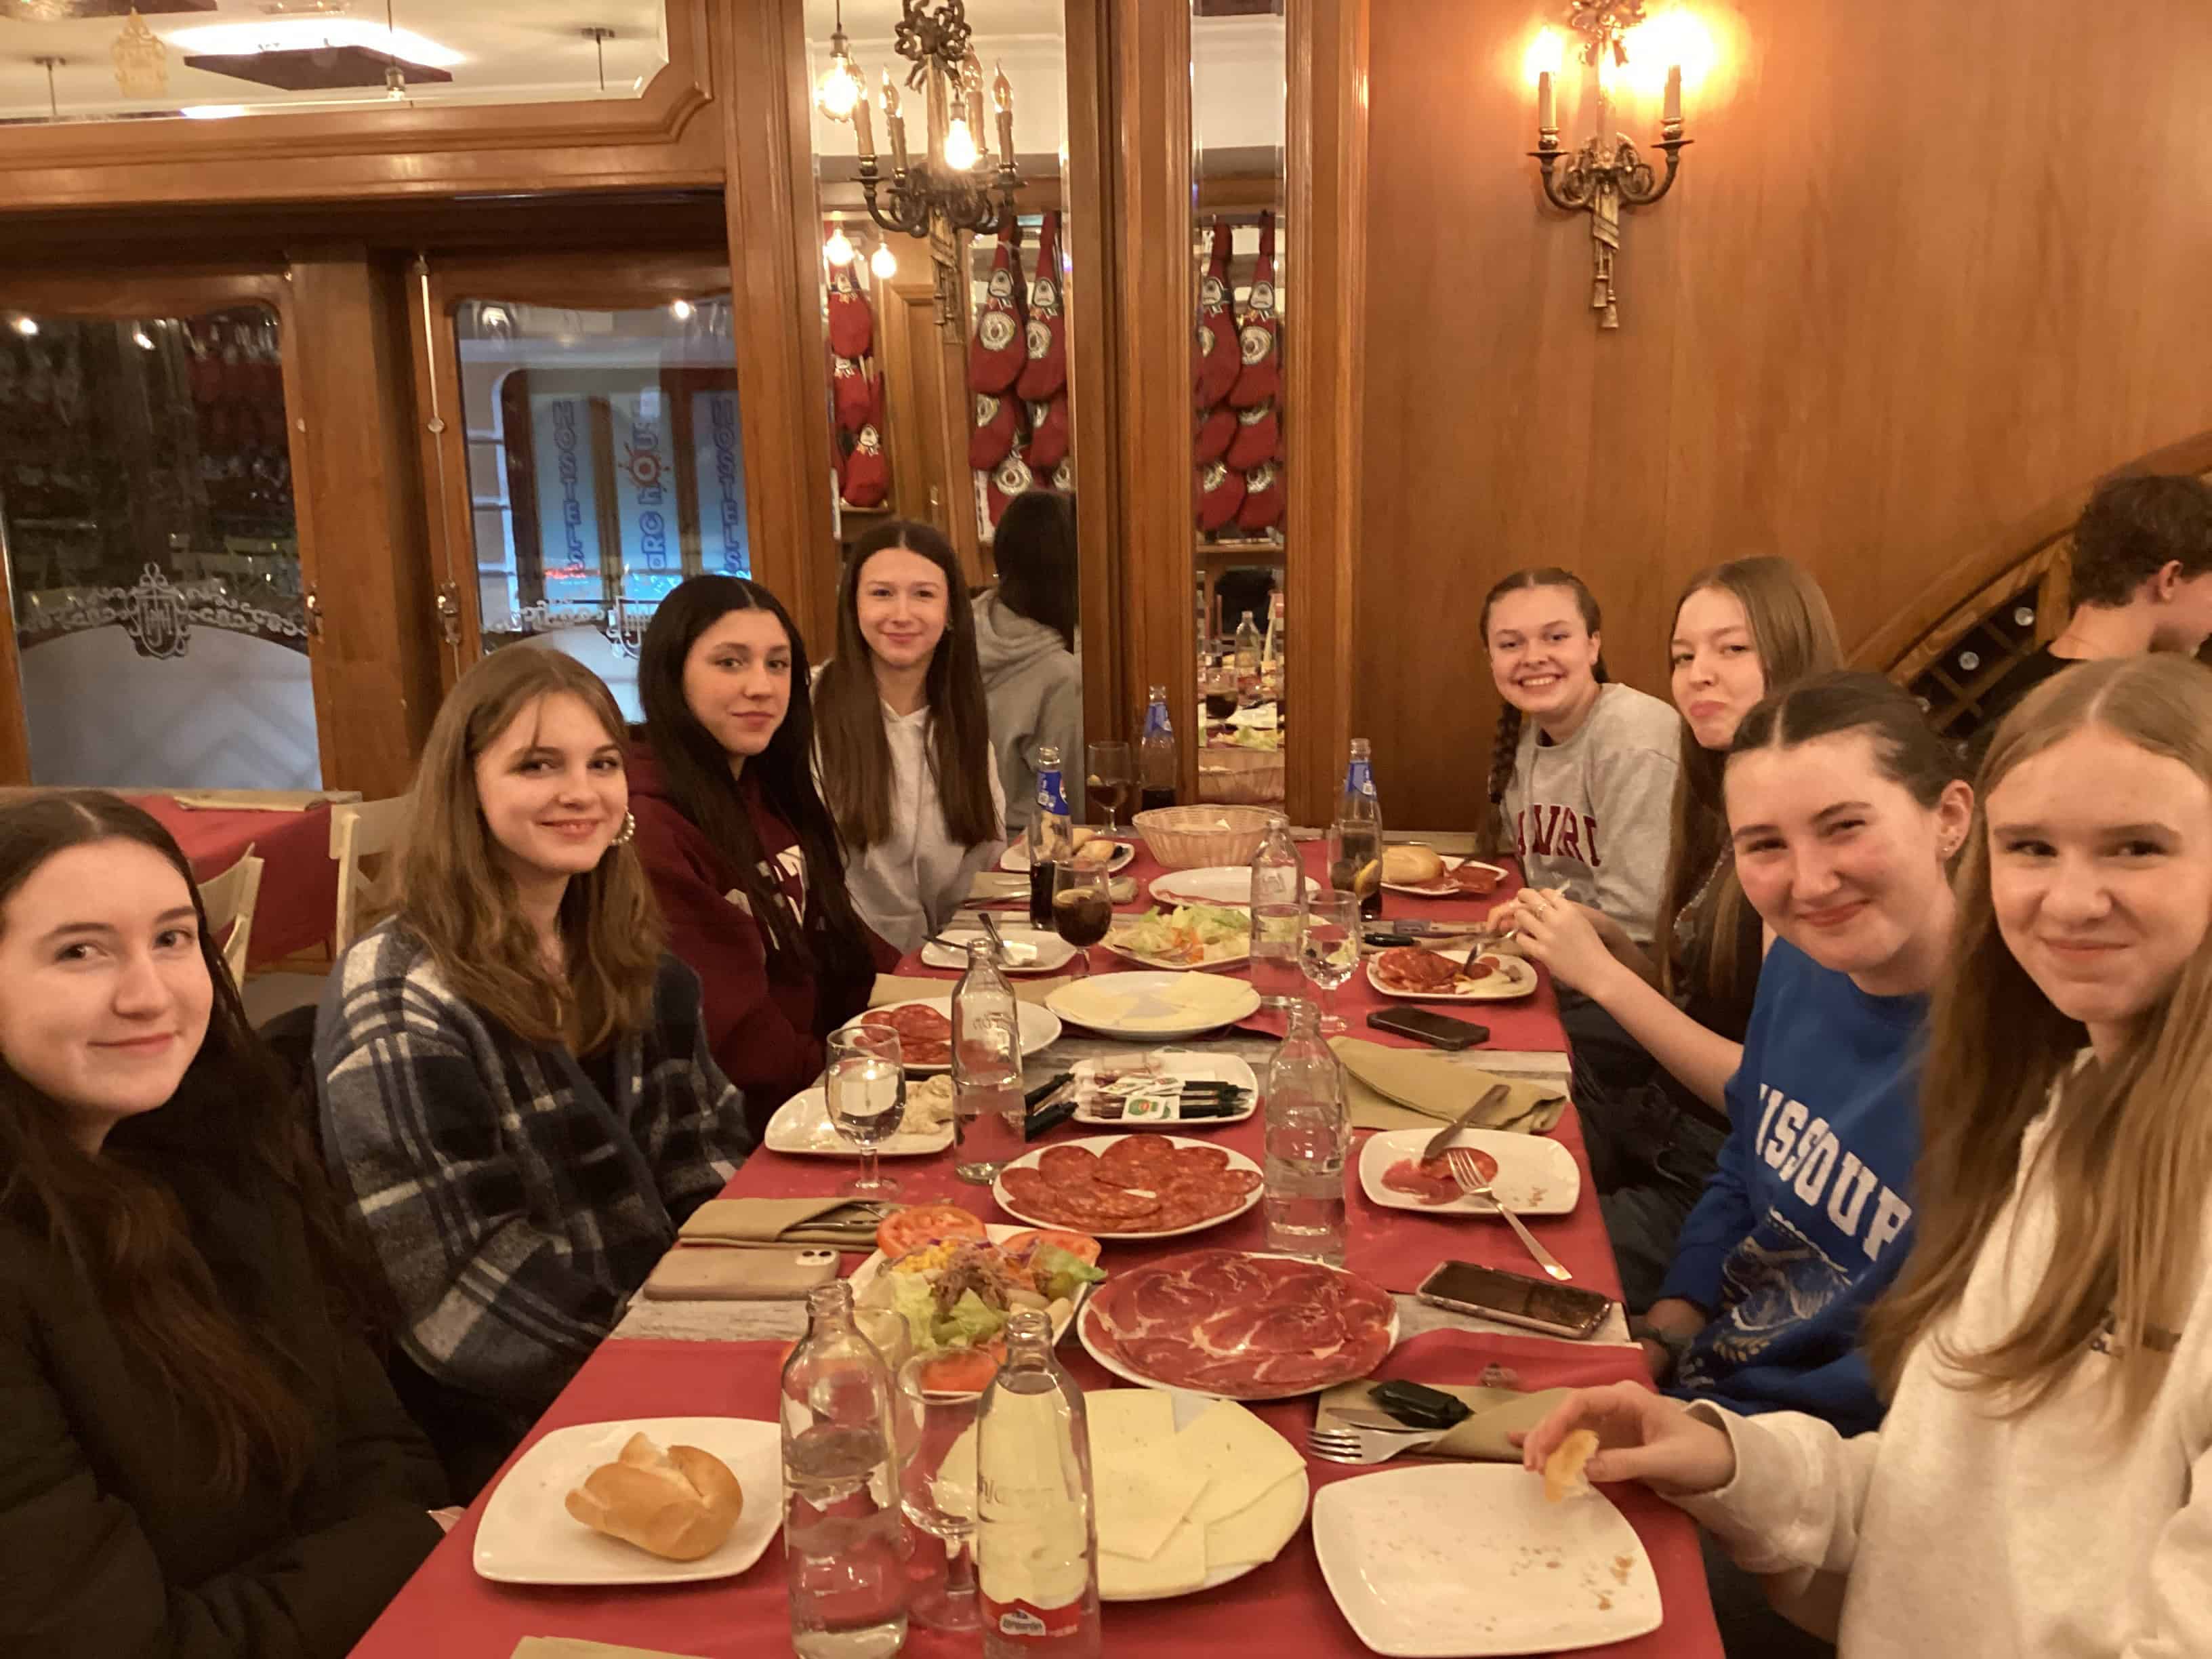 Students from Priestnall School have dinner at a traditional Spanish tapas restaurant.